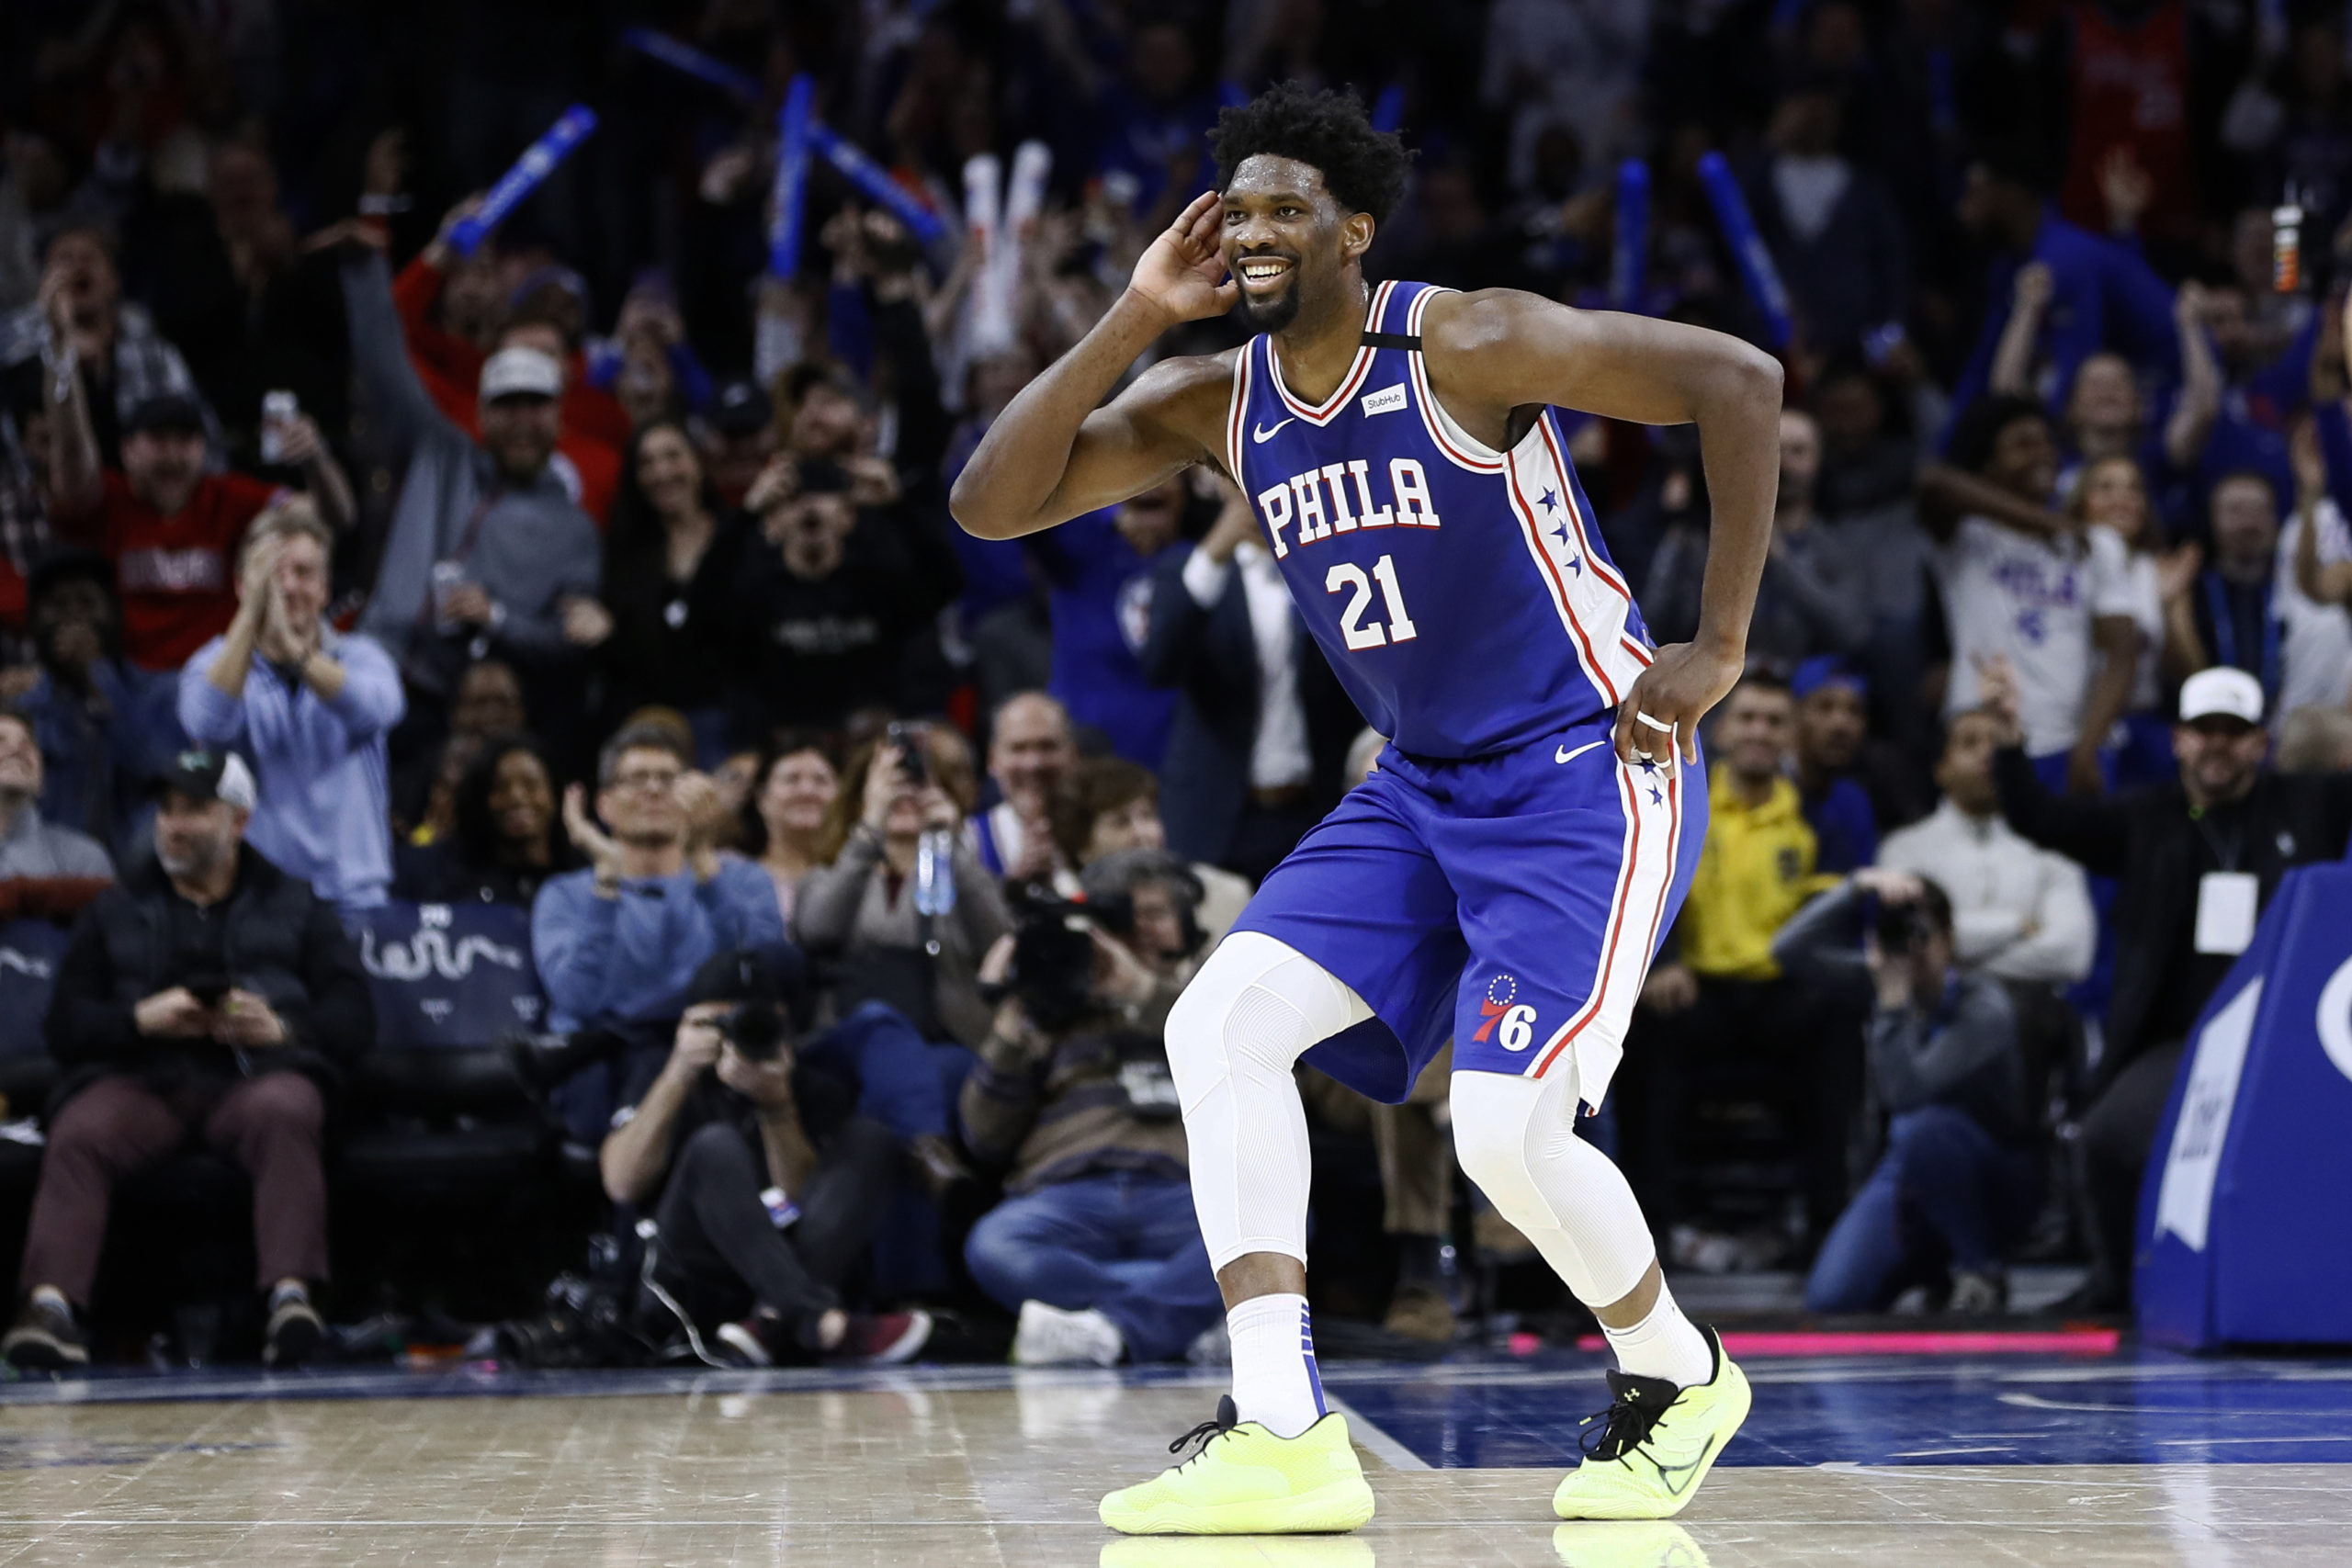 In this Feb. 24, 2020, file photo, Philadelphia 76ers' Joel Embiid celebrates after a three-point basket during the second half of an NBA basketball game against the Atlanta Hawks in Philadelphia.